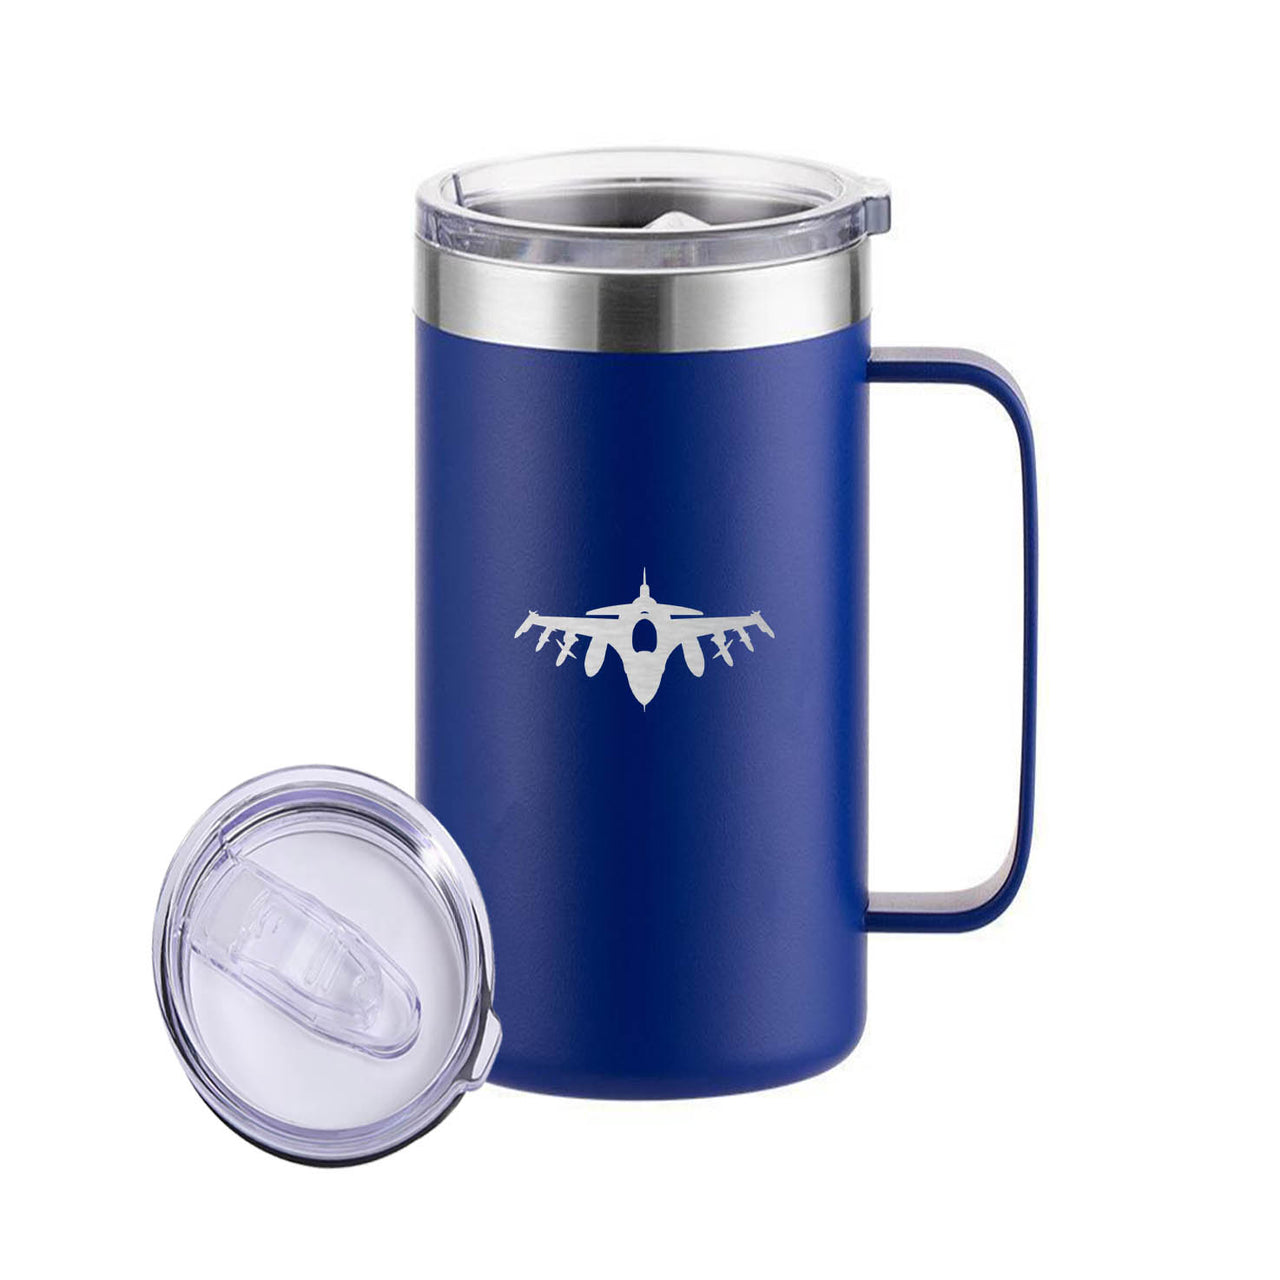 Fighting Falcon F16 Silhouette Designed Stainless Steel Beer Mugs